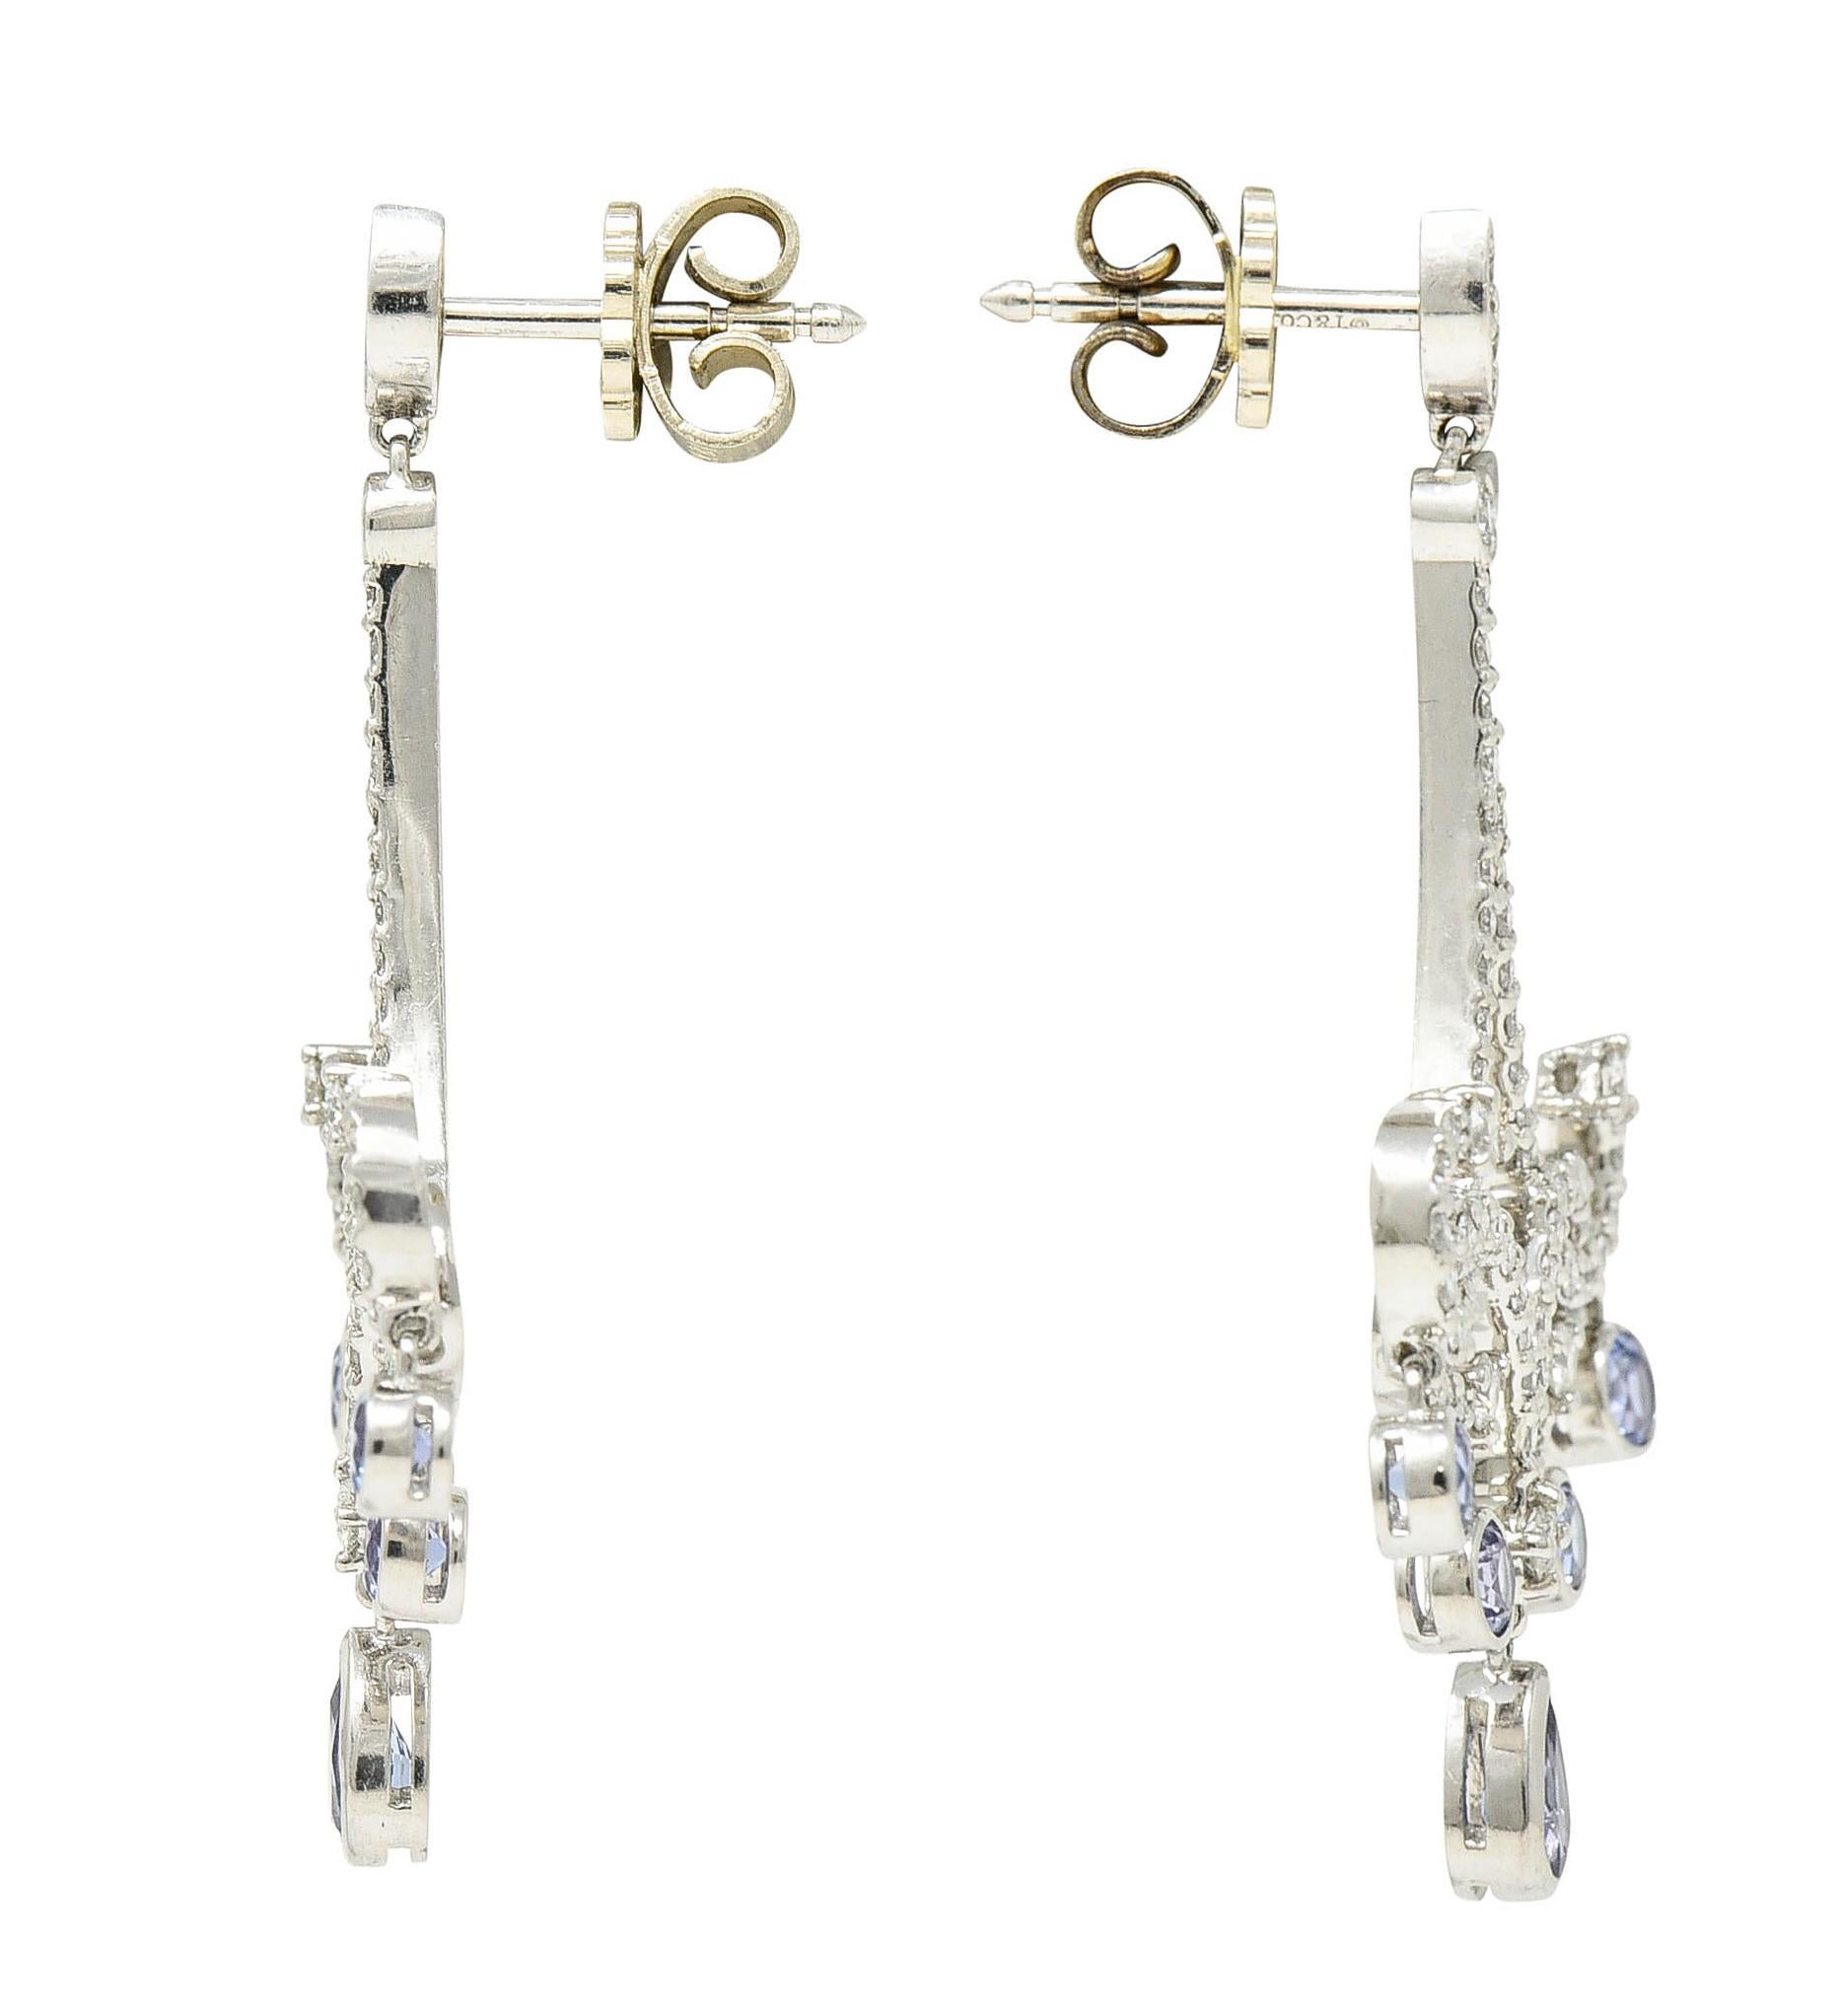 Drop earrings have an articulated navette surmount suspending an ornately scrolled drop

Set throughout by round brilliant cut diamonds weighing in total approximately 1.50 carats - G/H color with SI clarity

With articulated droplets of round and